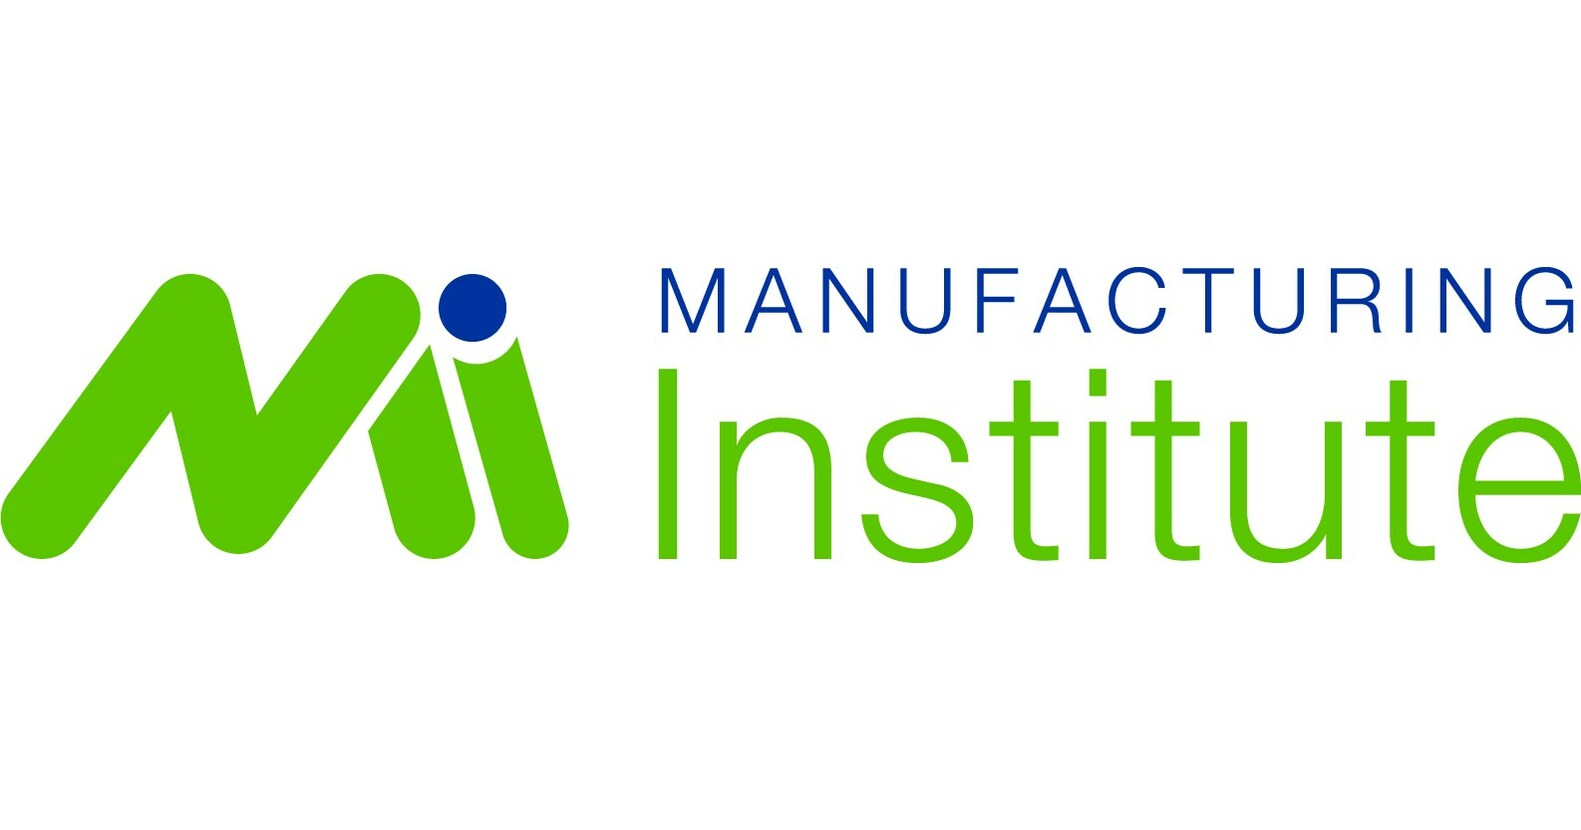 LP Building Solutions Supports the Manufacturing Institute's Visionary ...